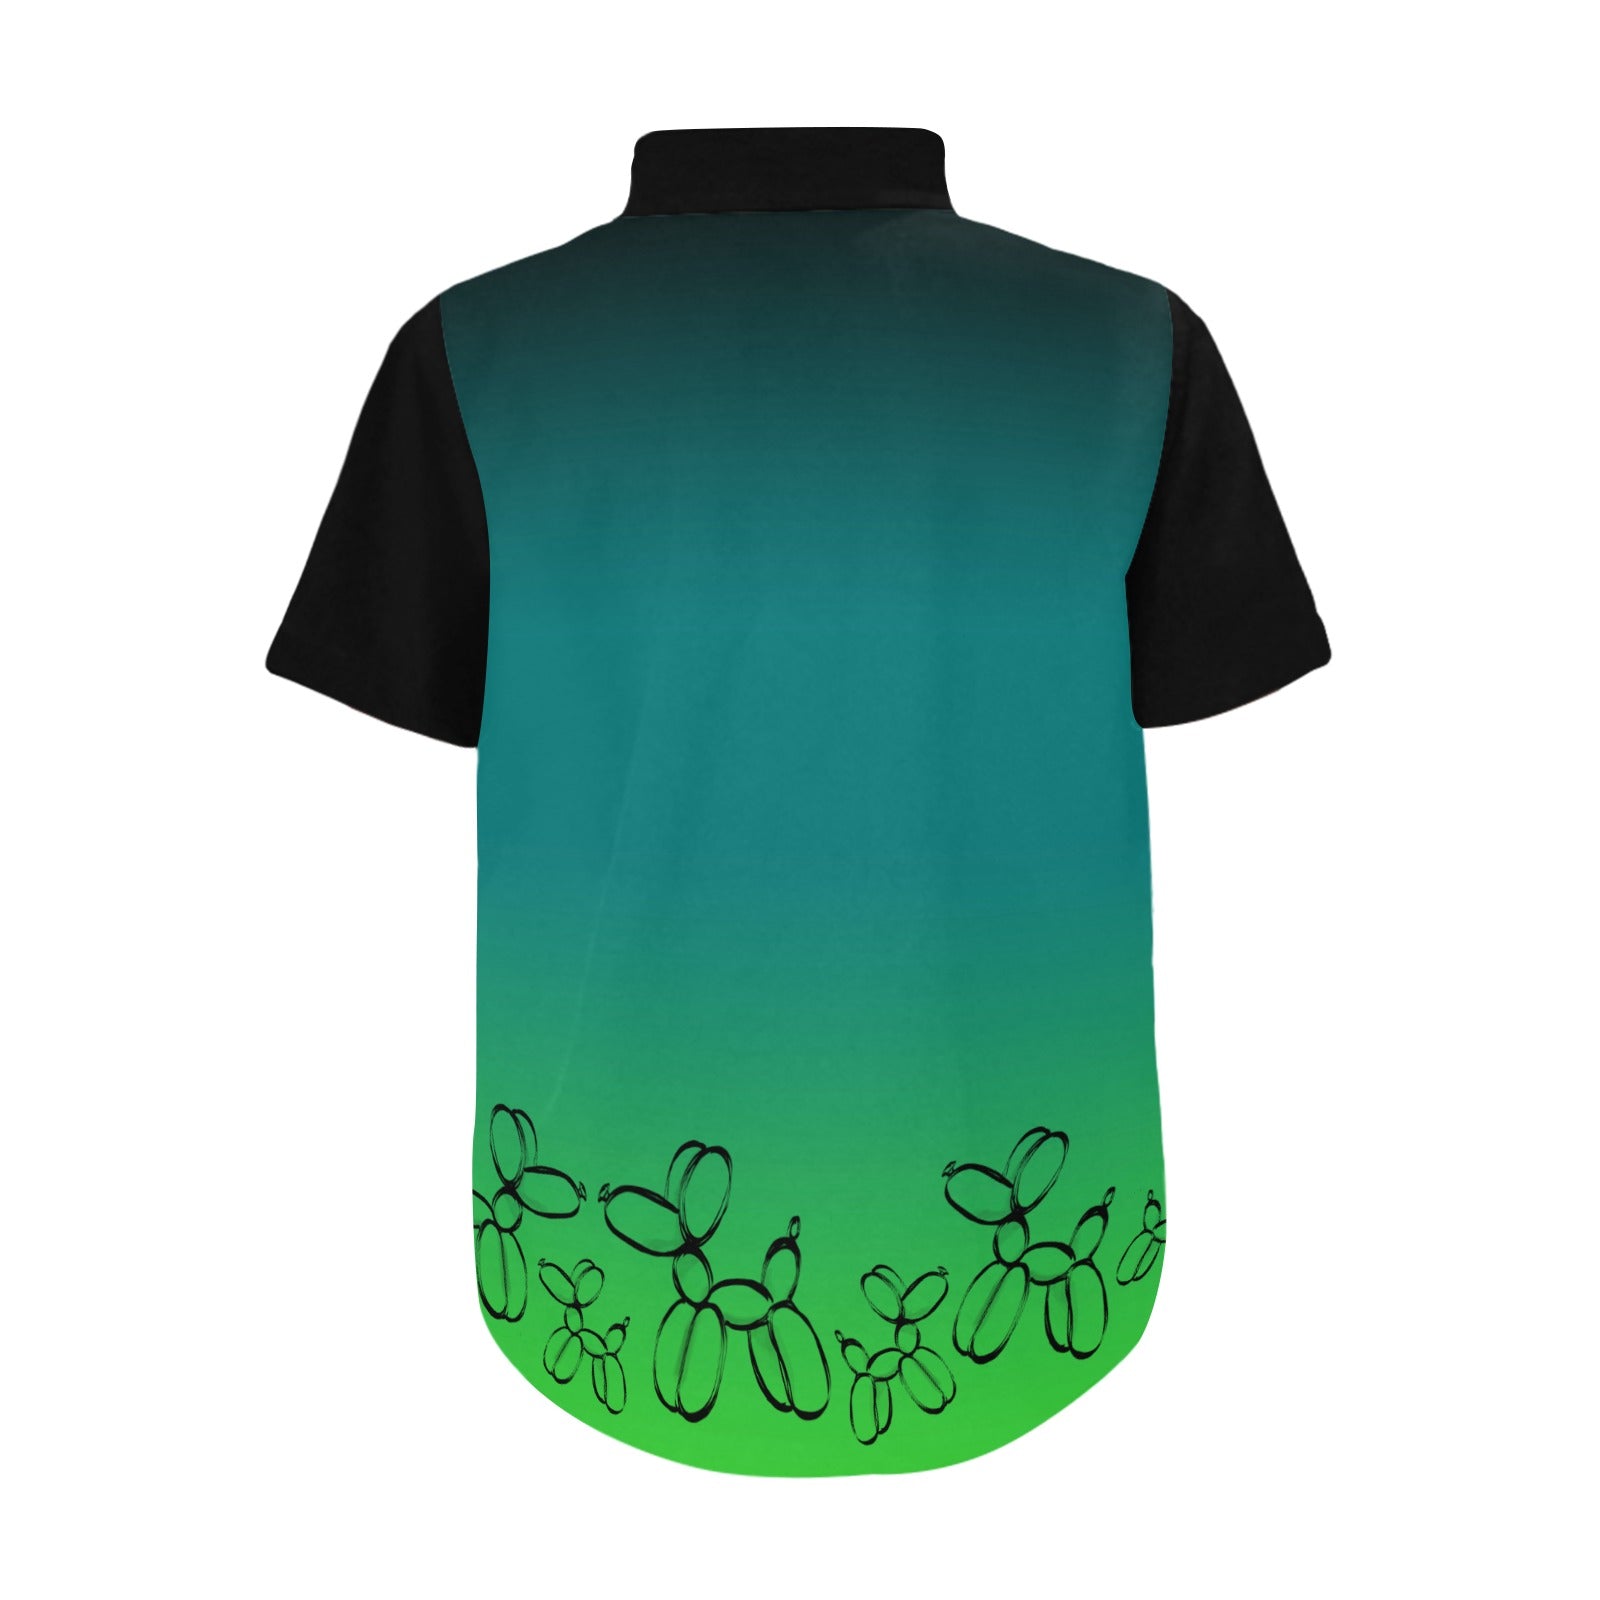 Teal Balloon Dog Shirt for kids and Women balloon twisters